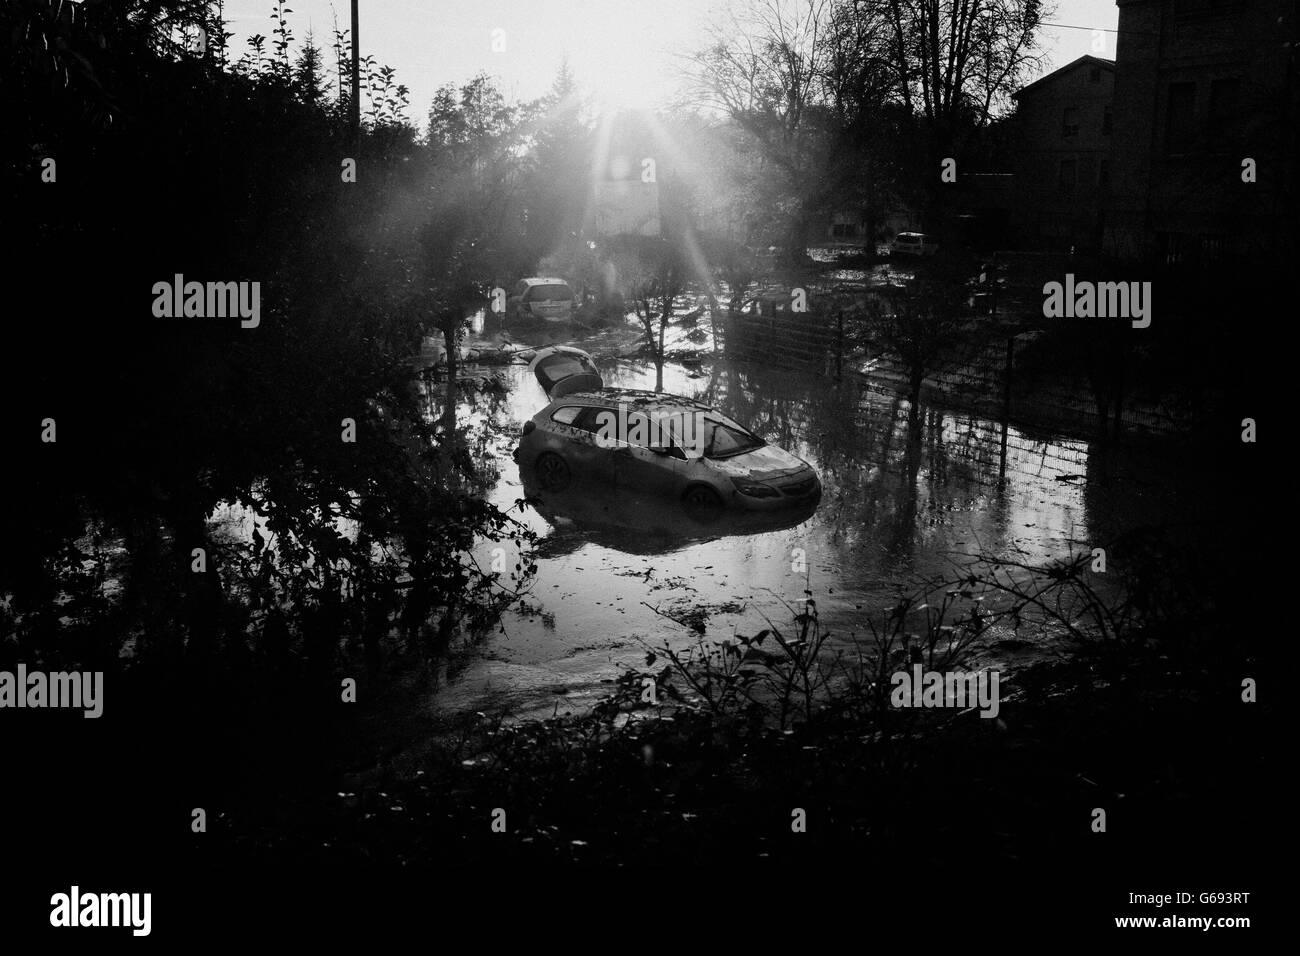 flood in Parma, car immersed in the water. Stock Photo